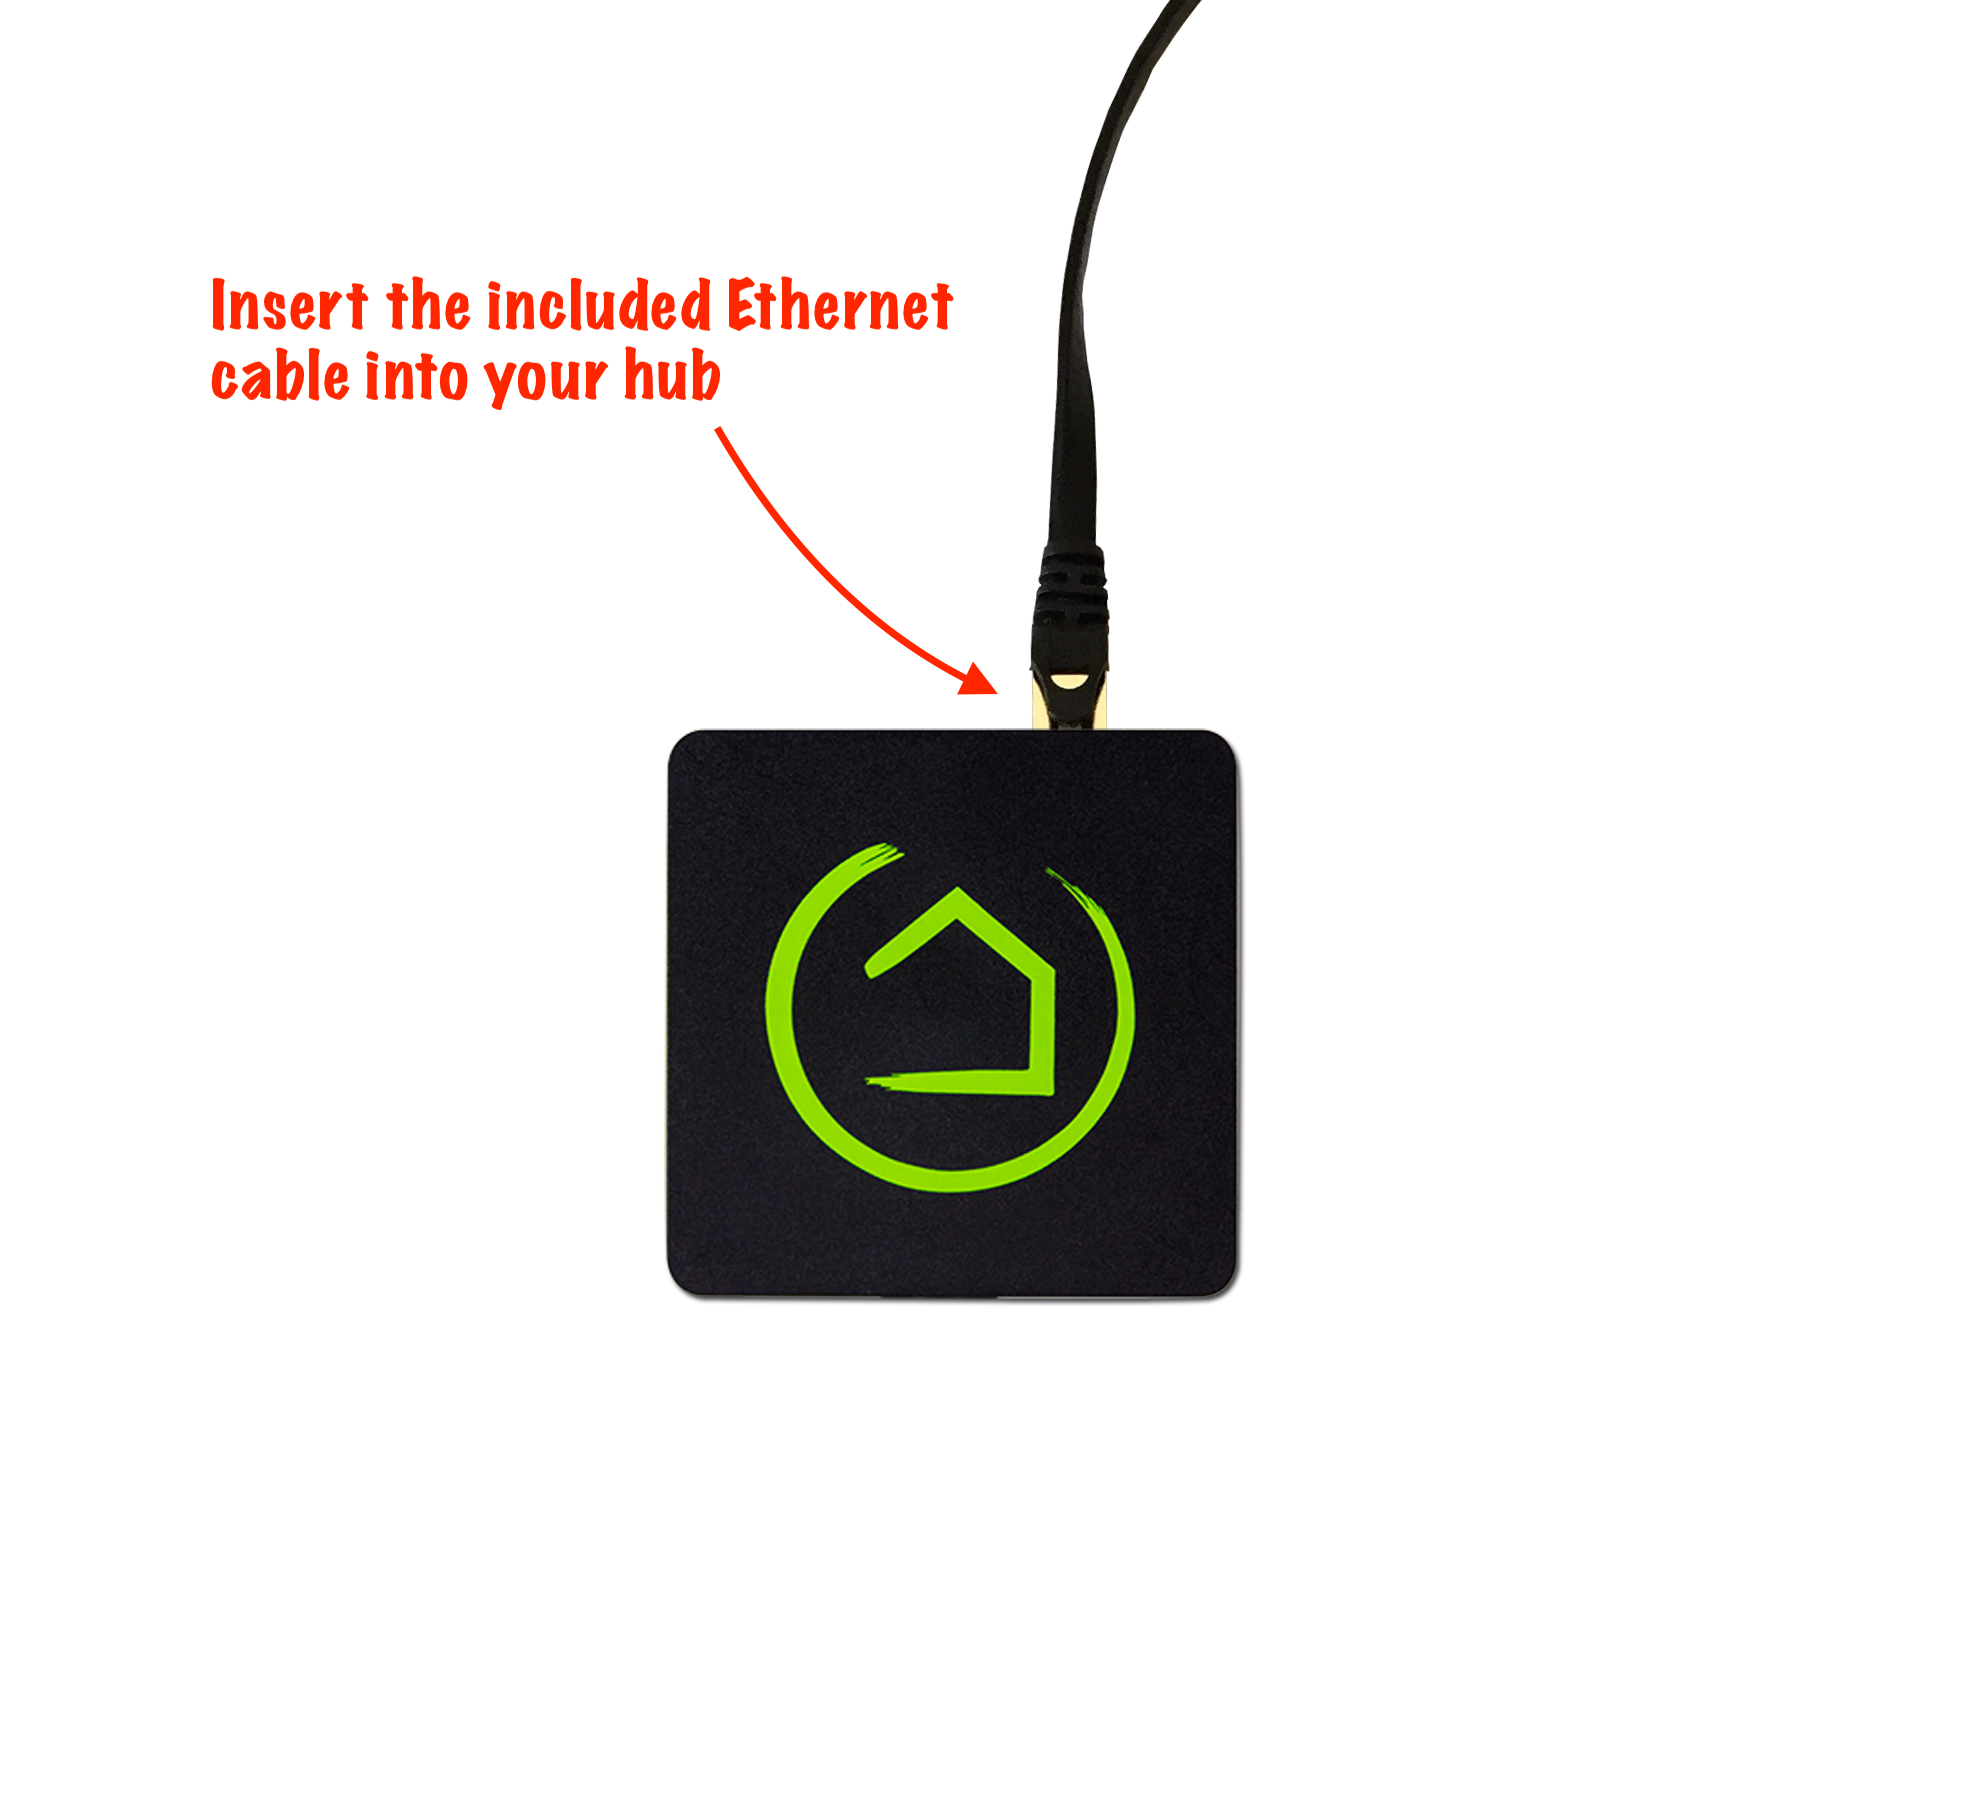 Insert one end of the included Ethernet cable into your hub